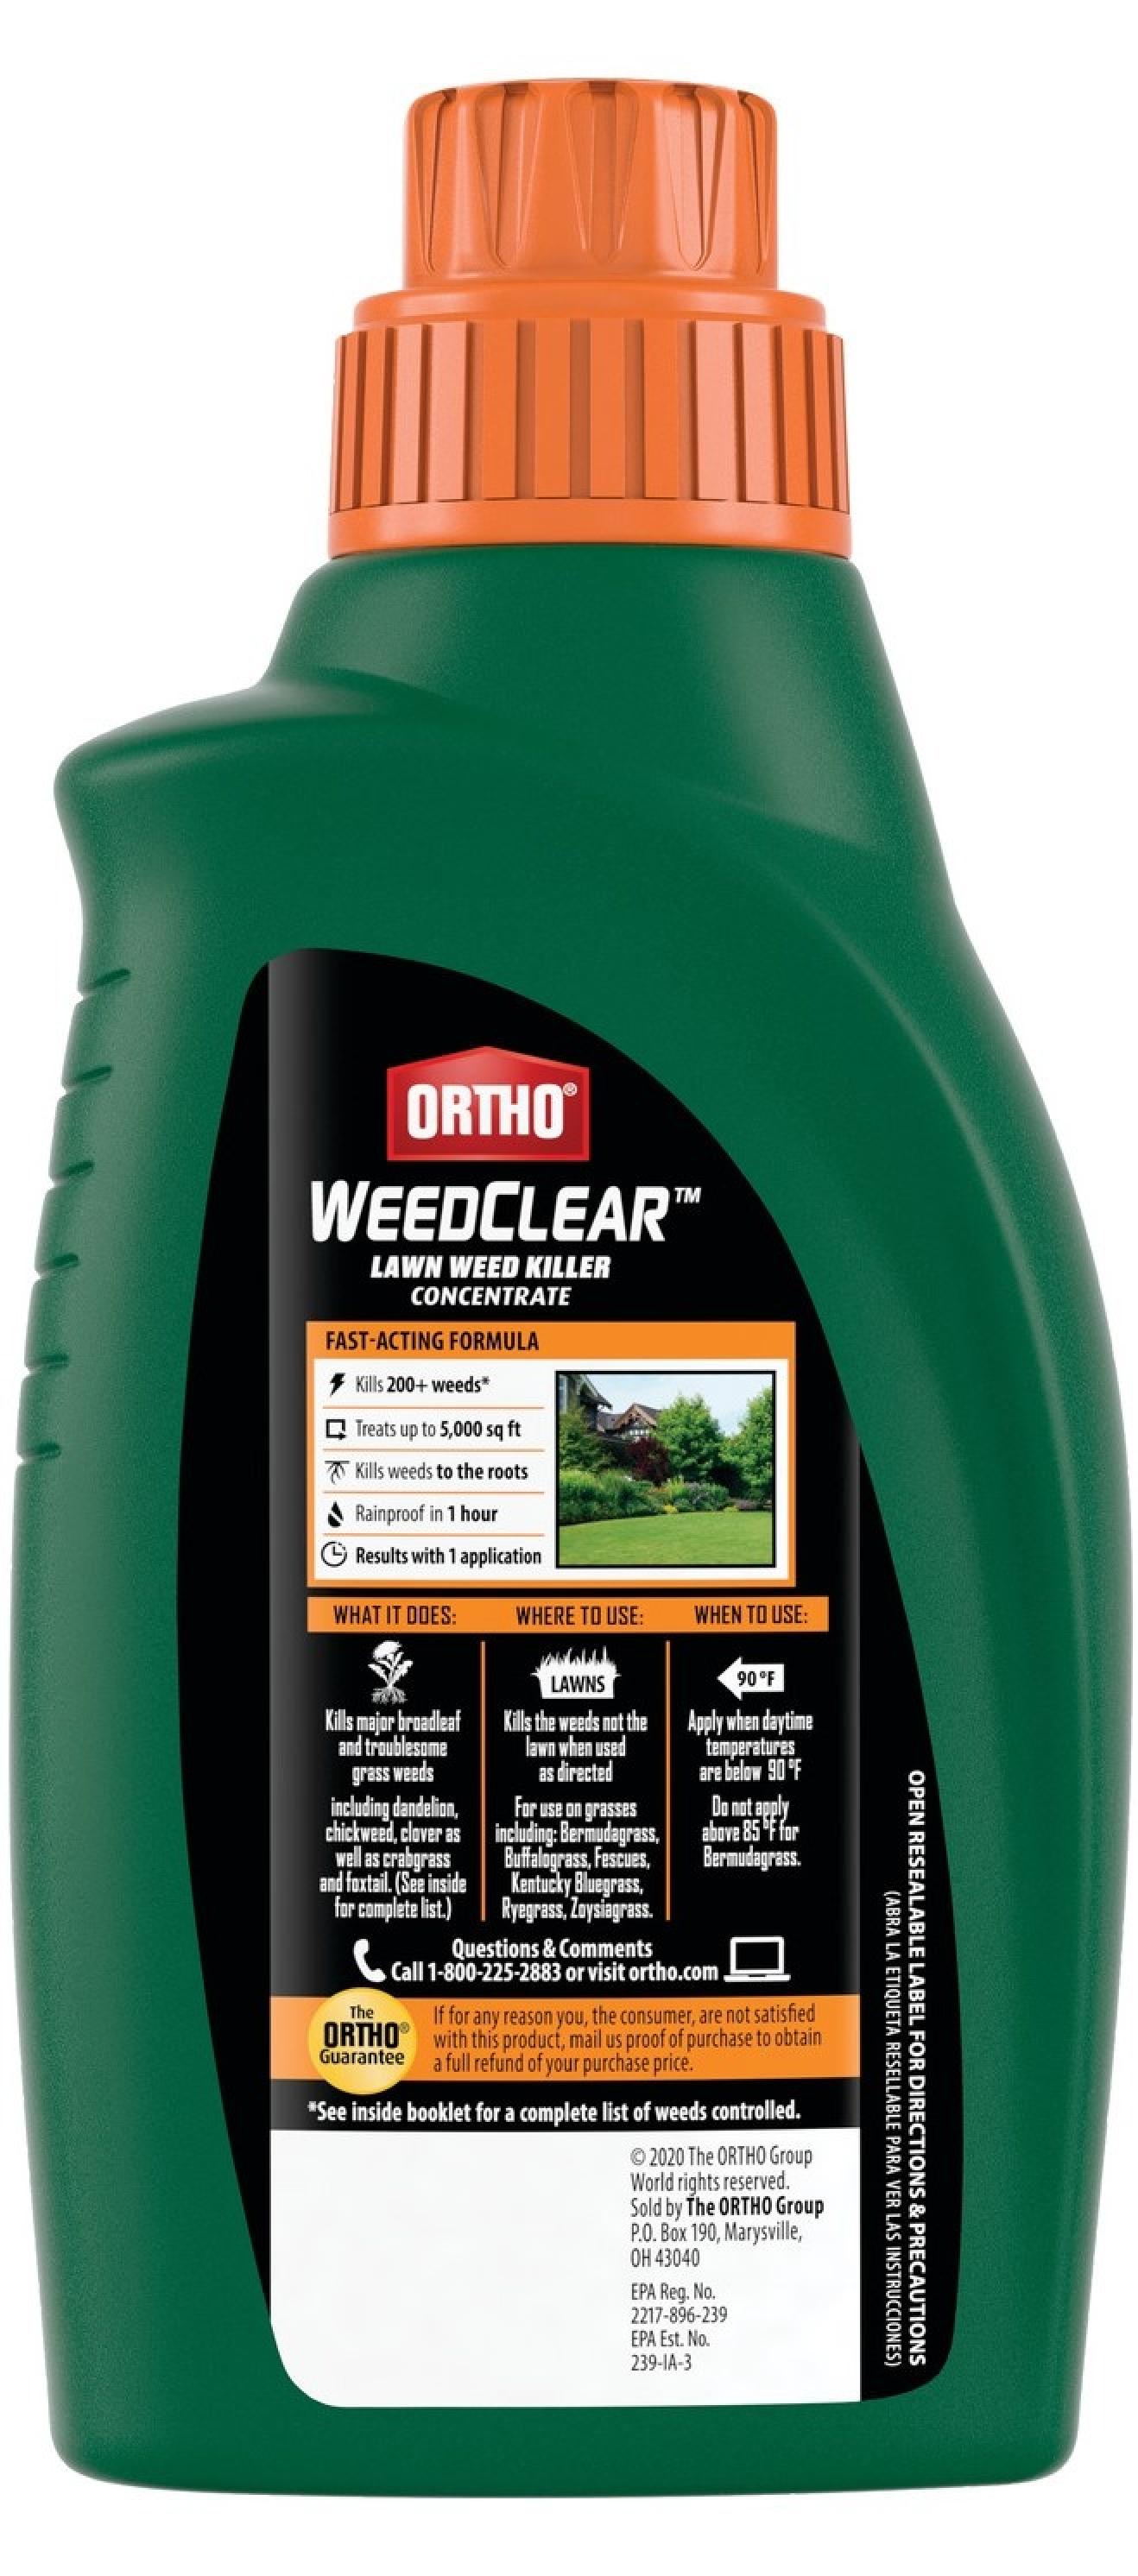 Ortho WeedClear Lawn Weed Killer Concentrate